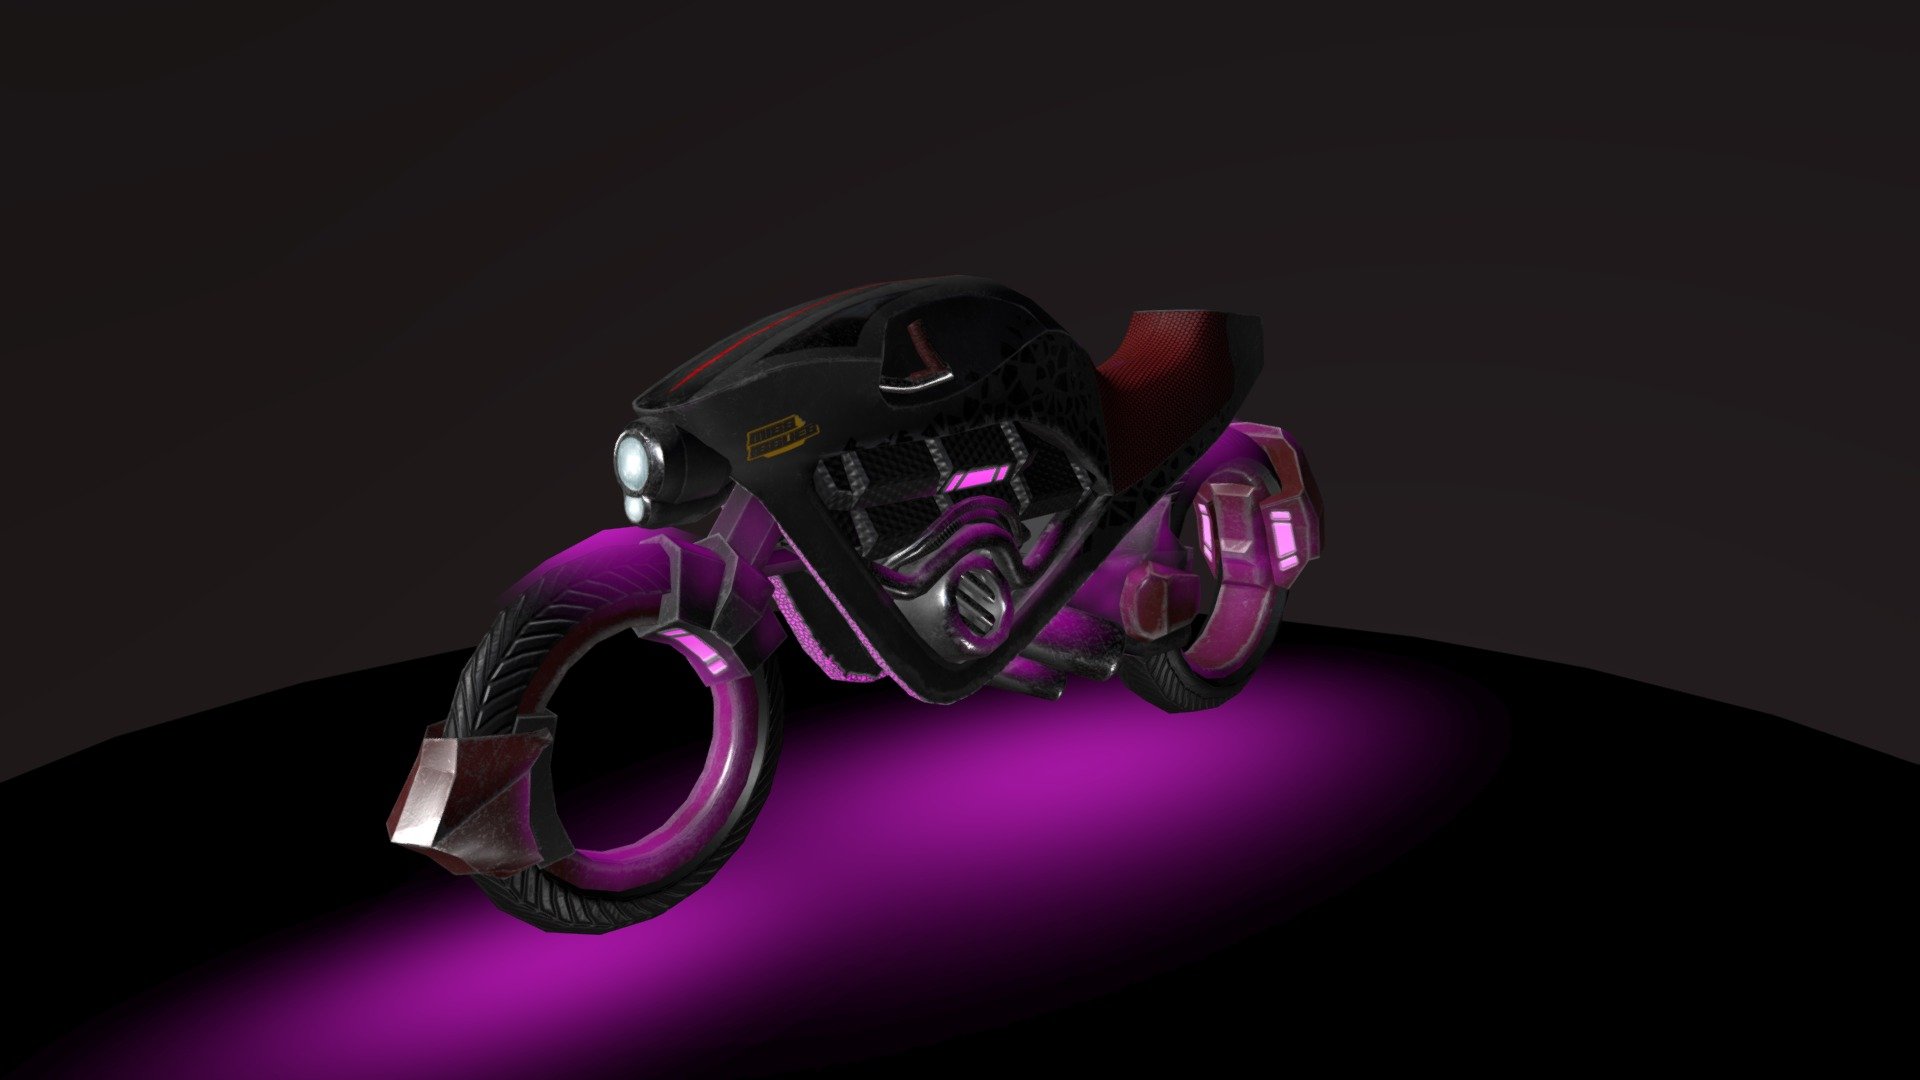 Nefarious Intentions (Futuristic Motorcycle)